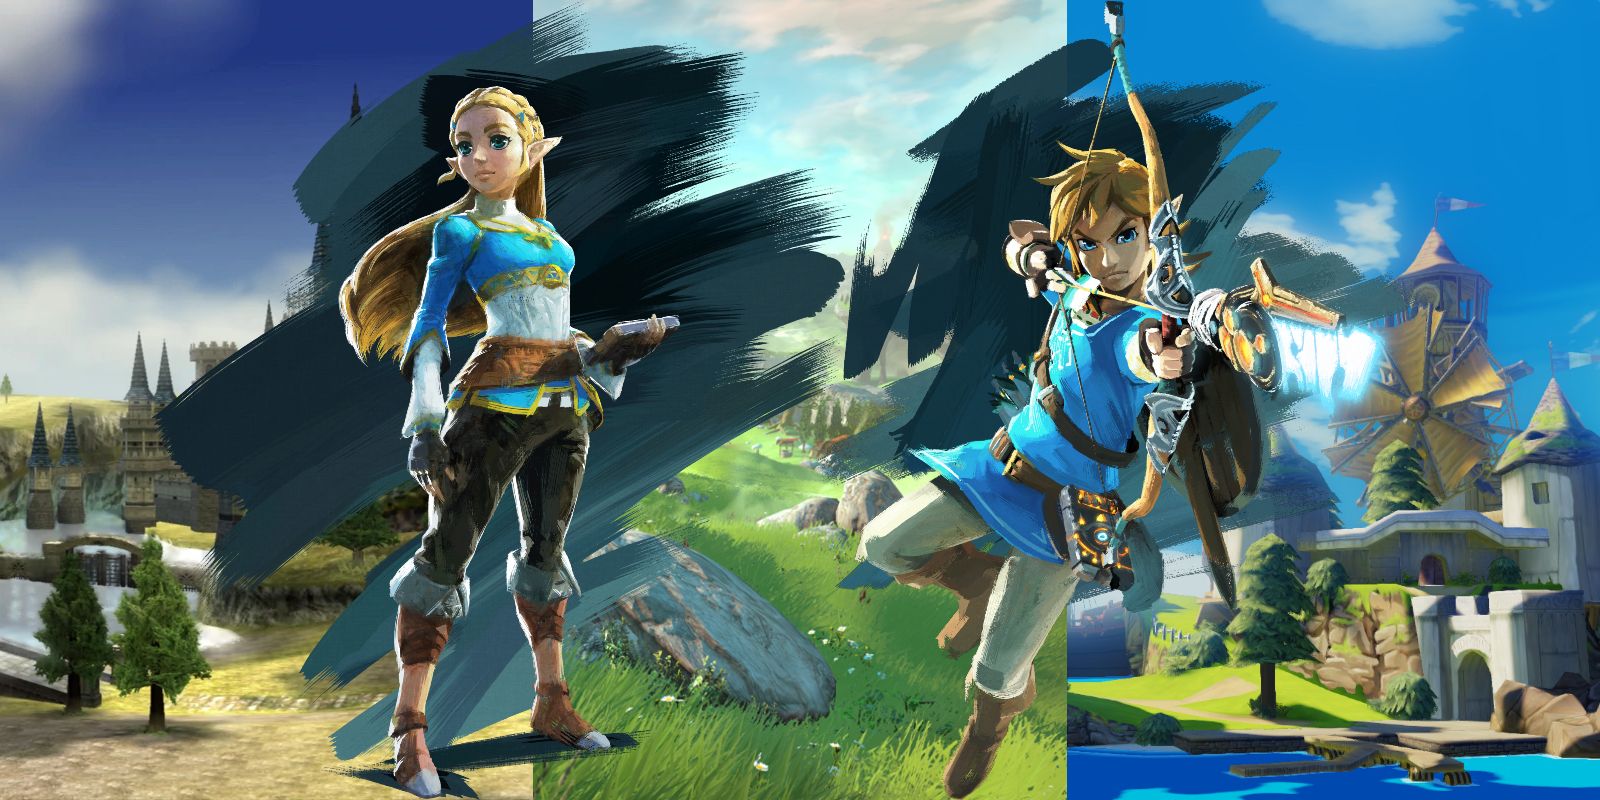 Artwork of Zelda and Link in front of screenshots from Breath of the Wild, Twilight Princess, and The Wind Waker.